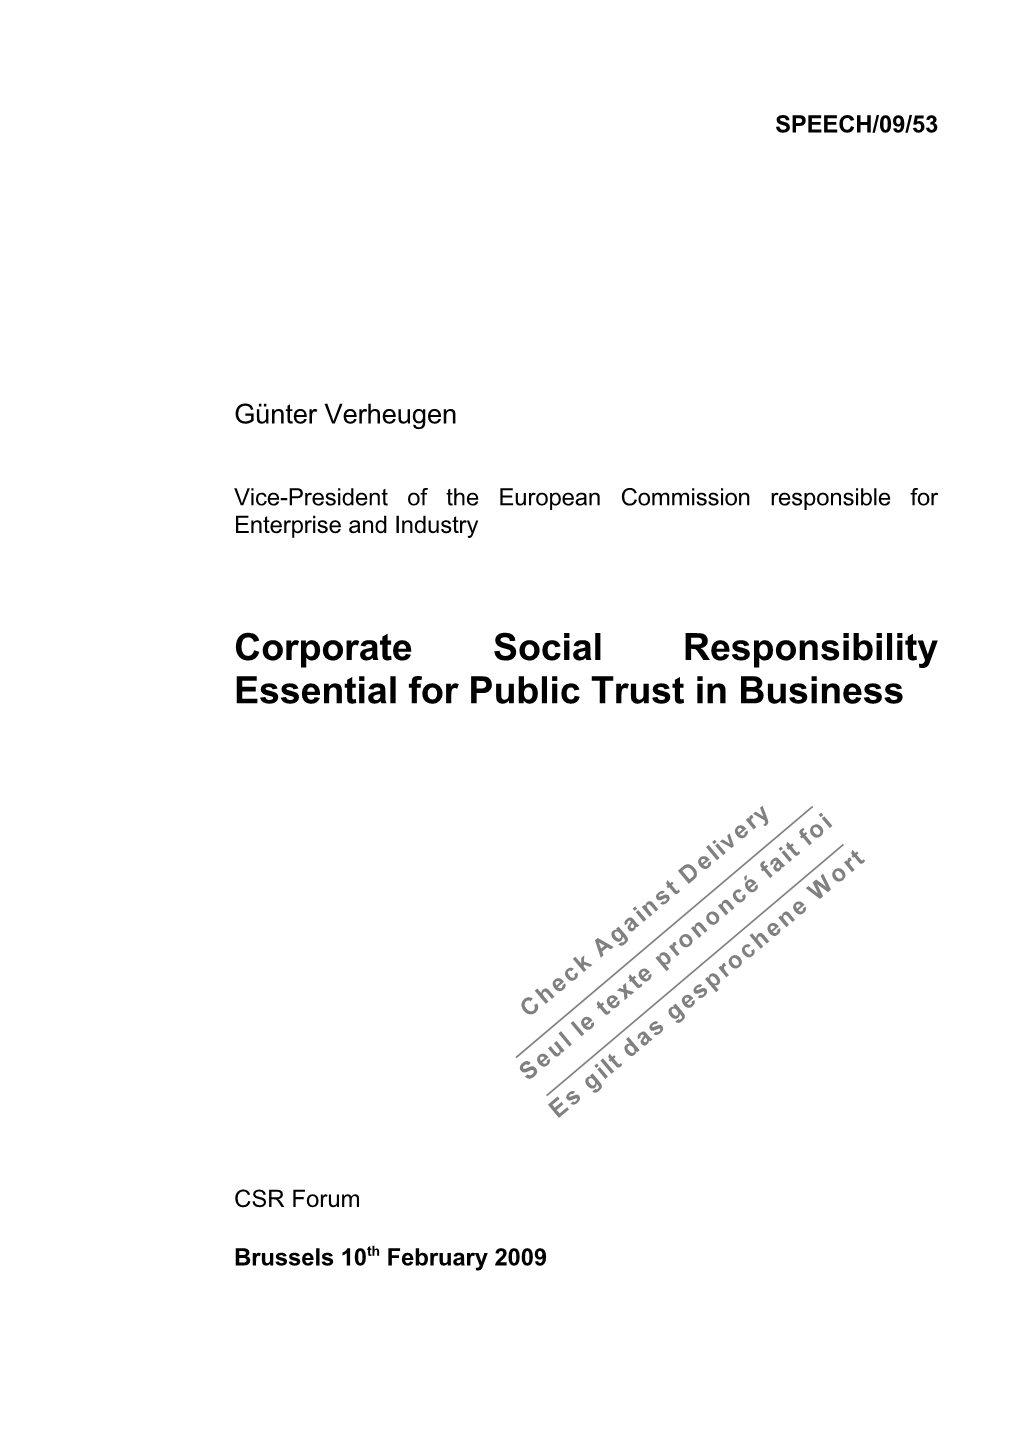 Corporate Social Responsibility Essential for Public Trust in Business